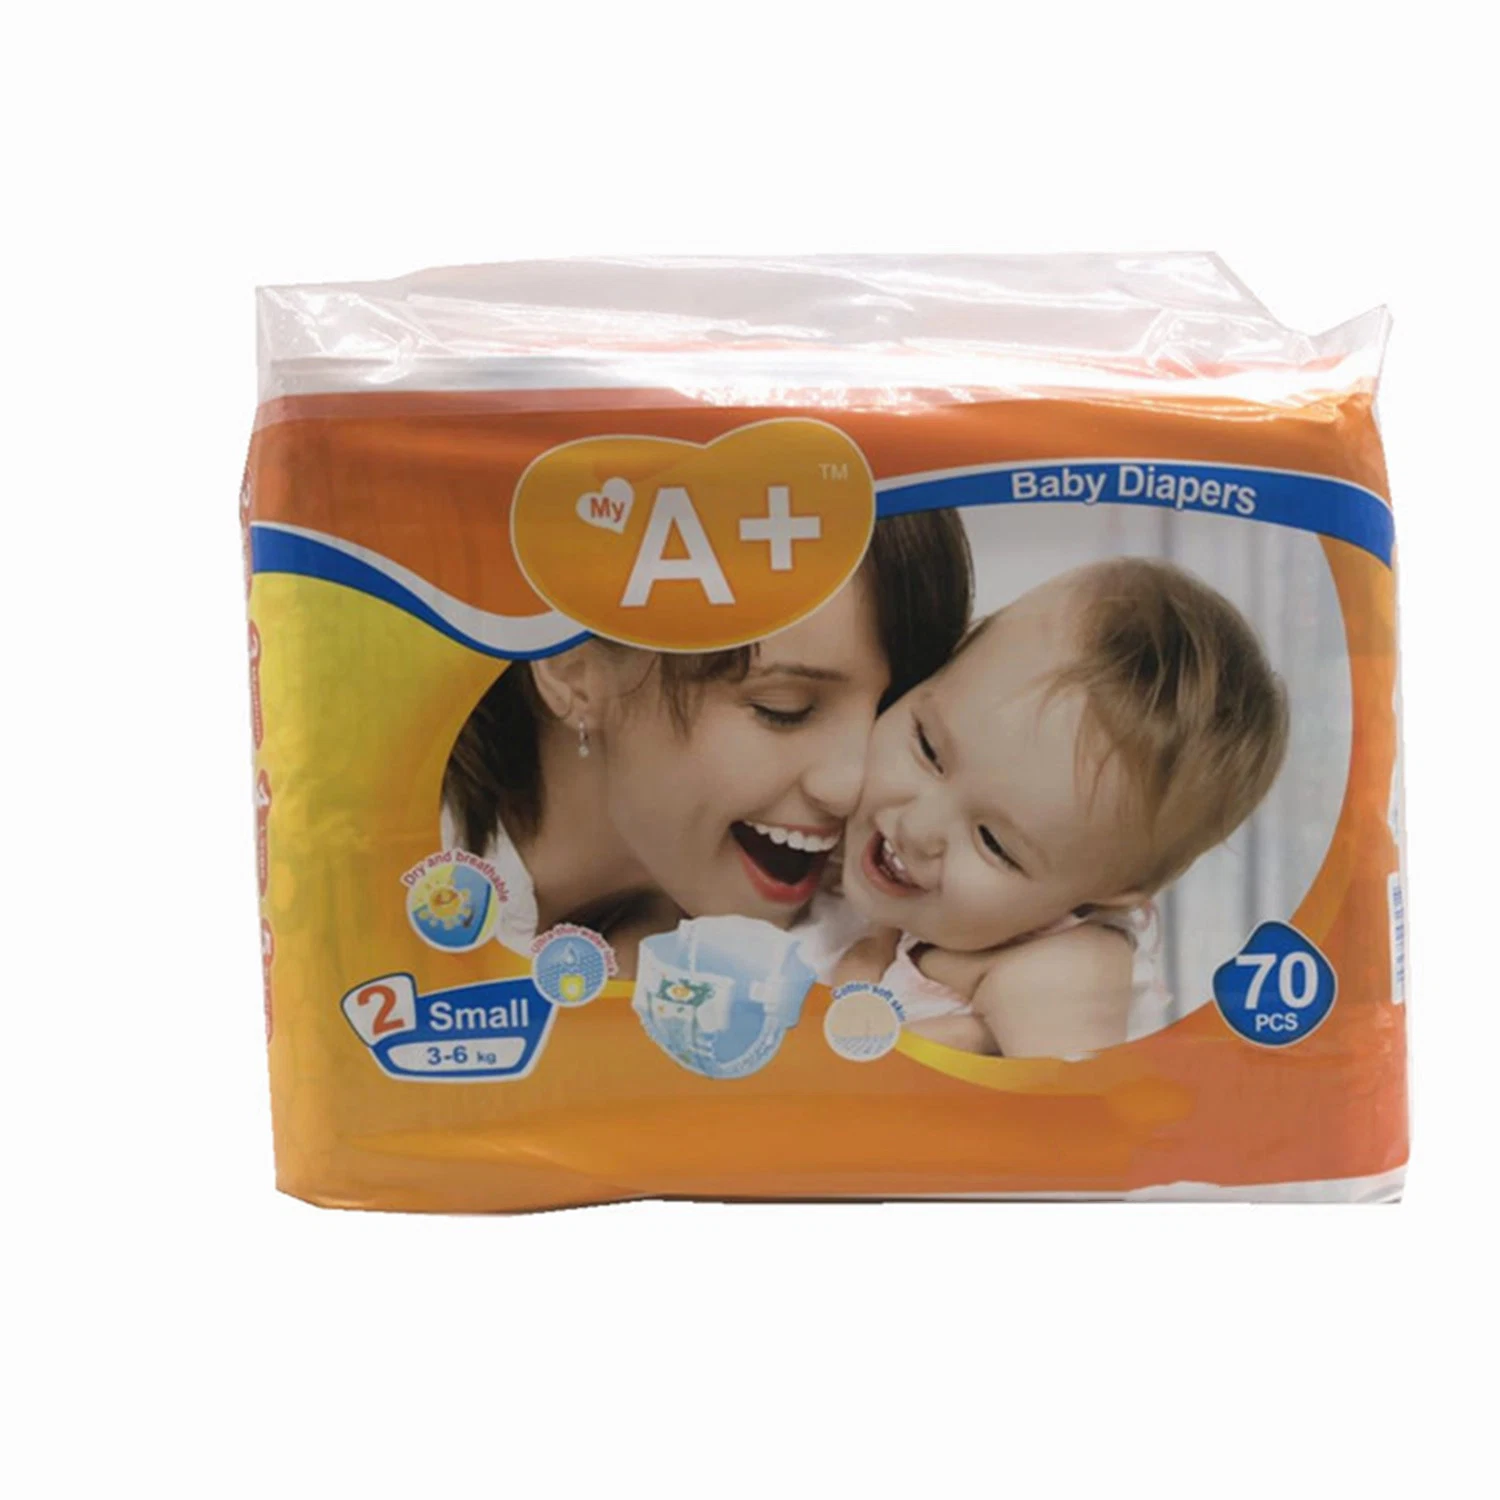 Dry Soft Nice Breathable Baby Diaper Cheap Disposable Diapers Care Newborn Bulk Wholesalers